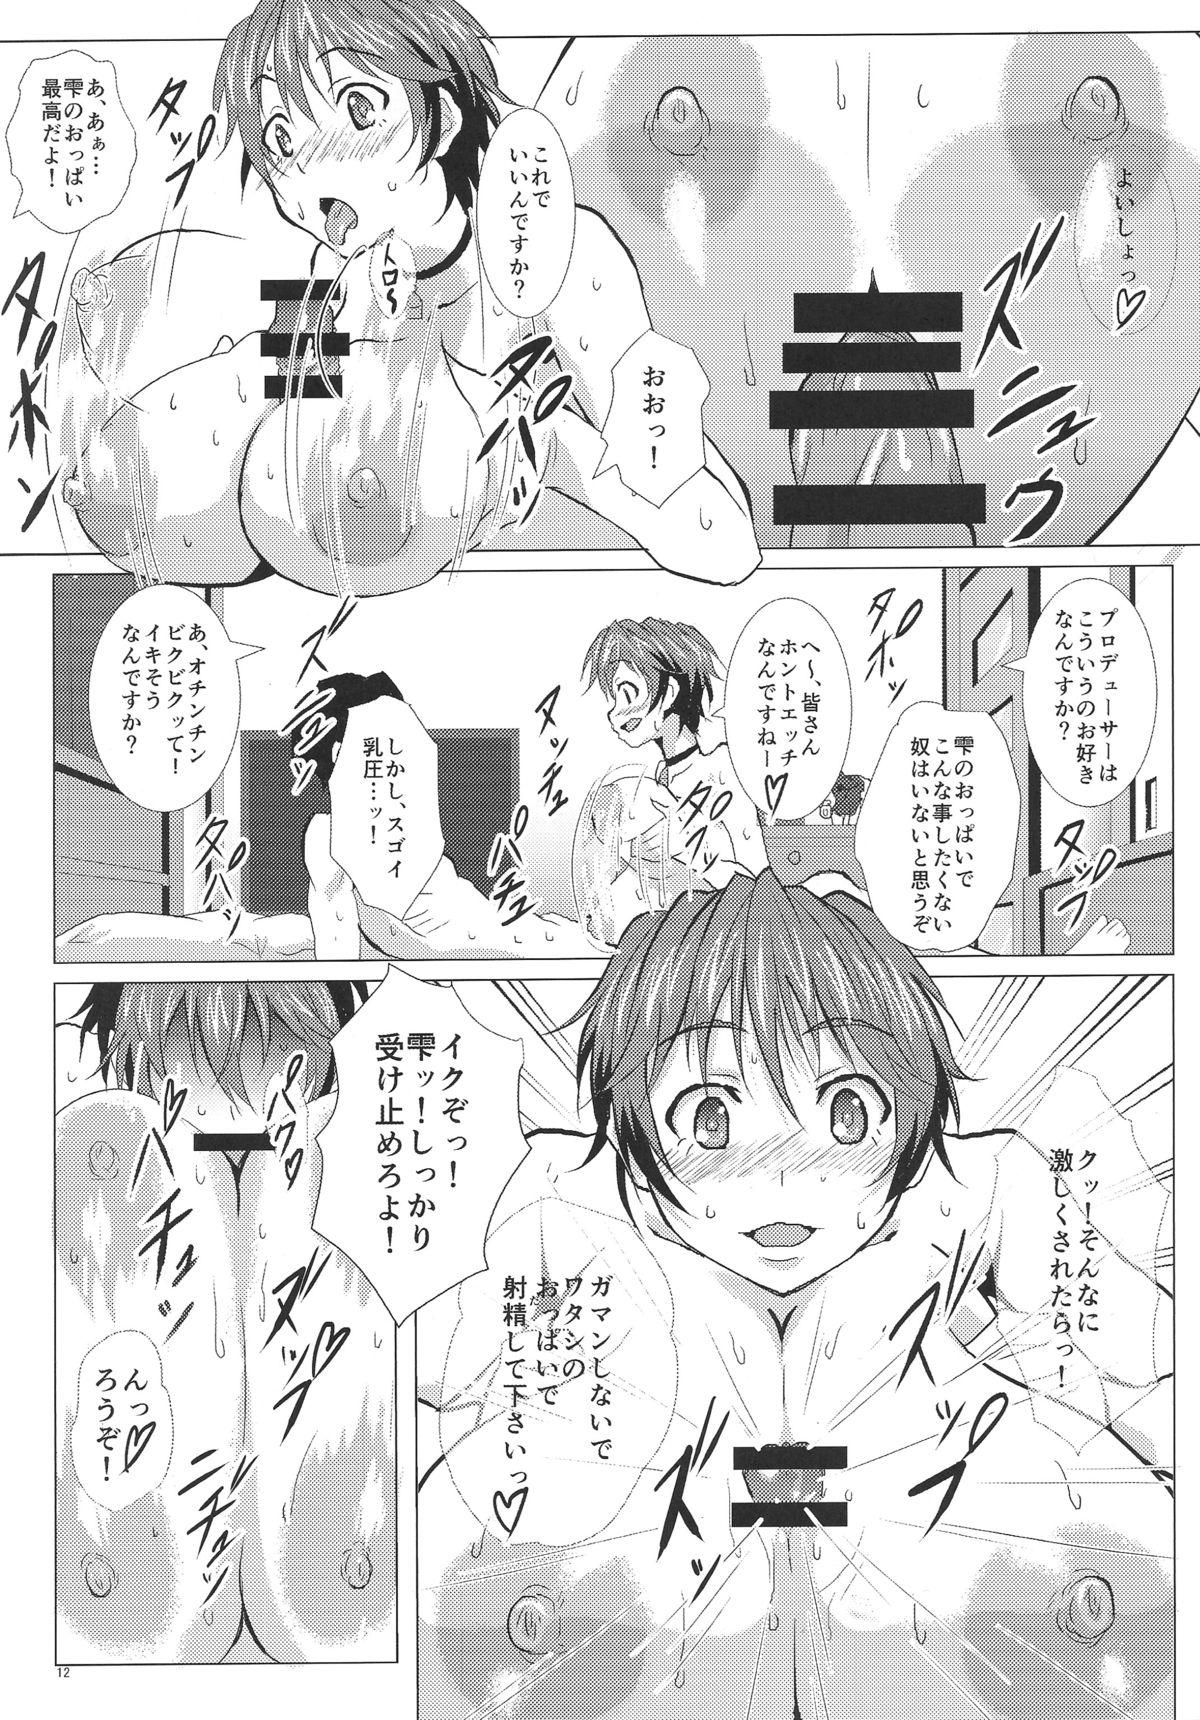 Ffm THE PAIDOLM@STER - The idolmaster Hot Naked Women - Page 11